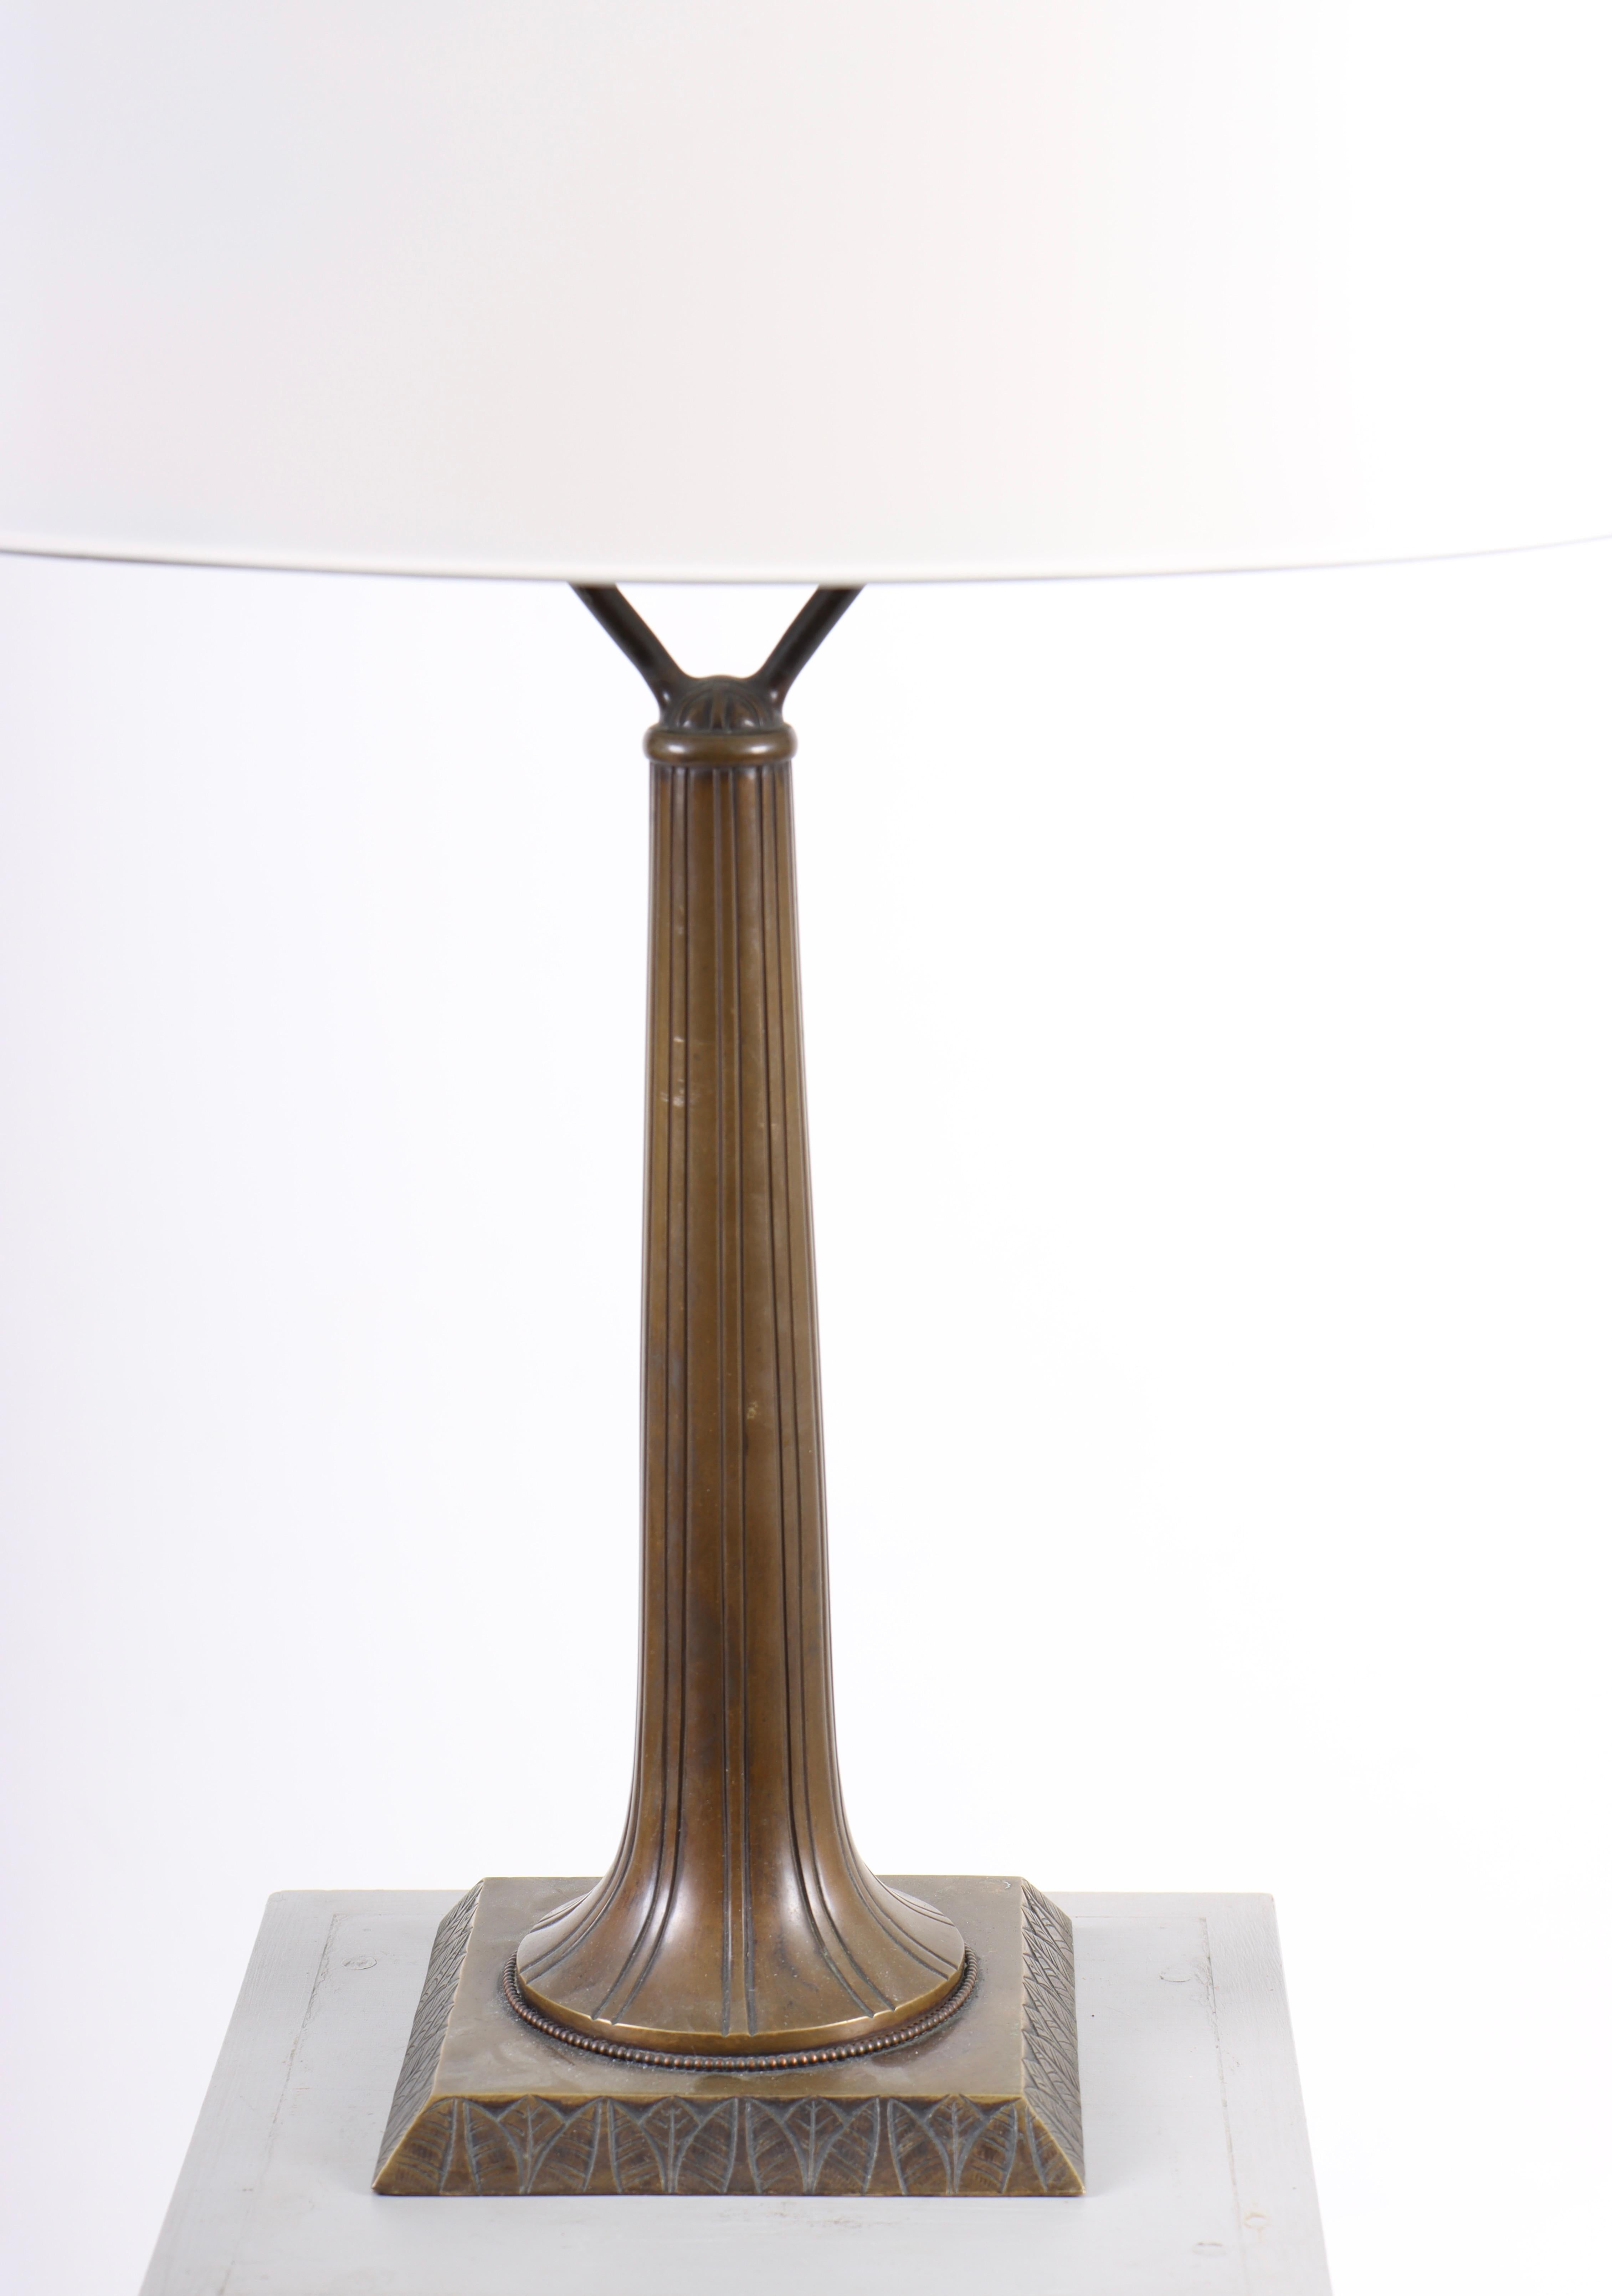 Danish Table Lamp in Patinated Brass by Mogens Ballin, 1930s For Sale